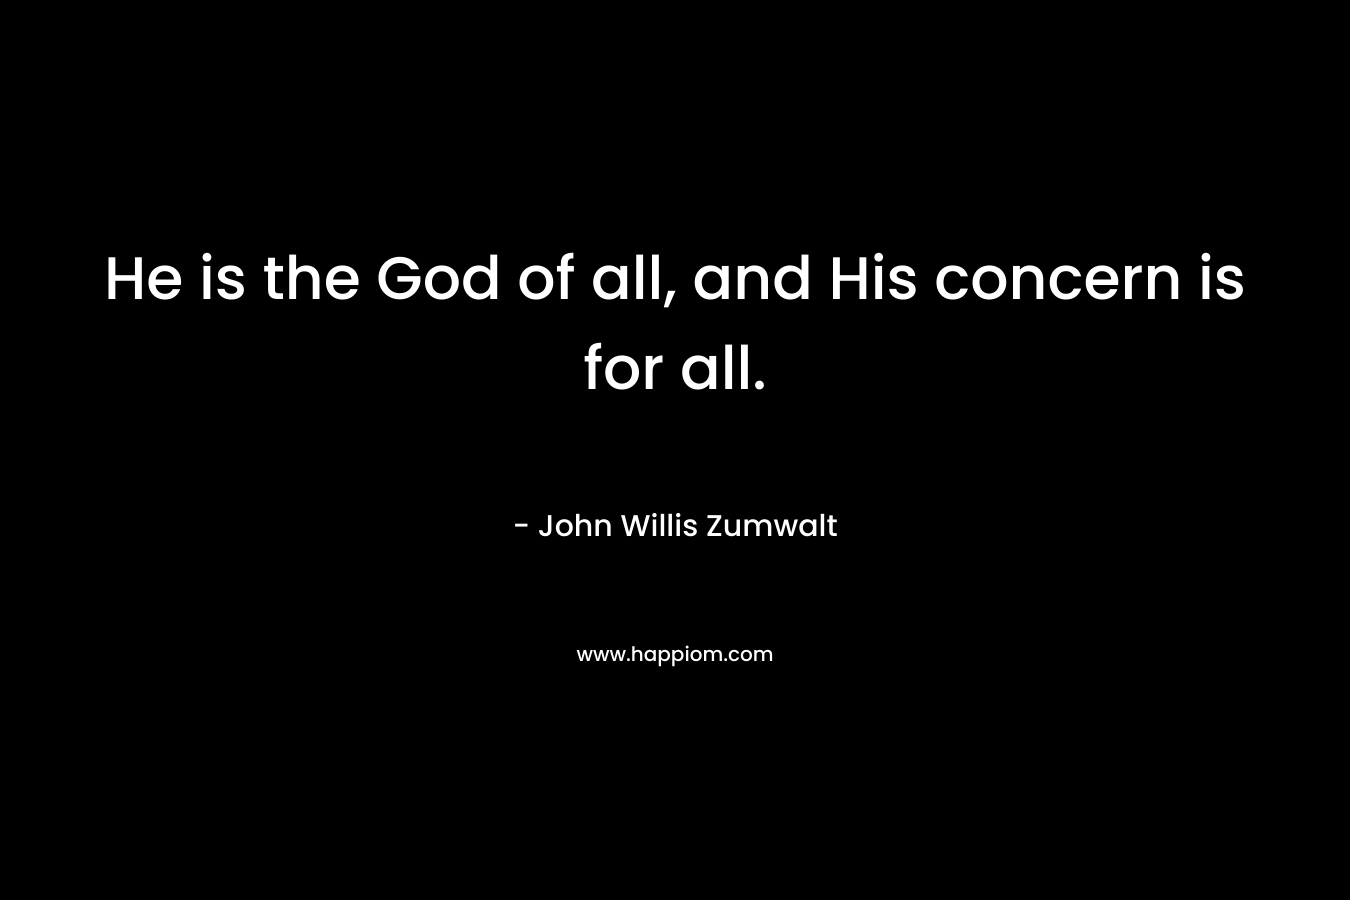 He is the God of all, and His concern is for all.